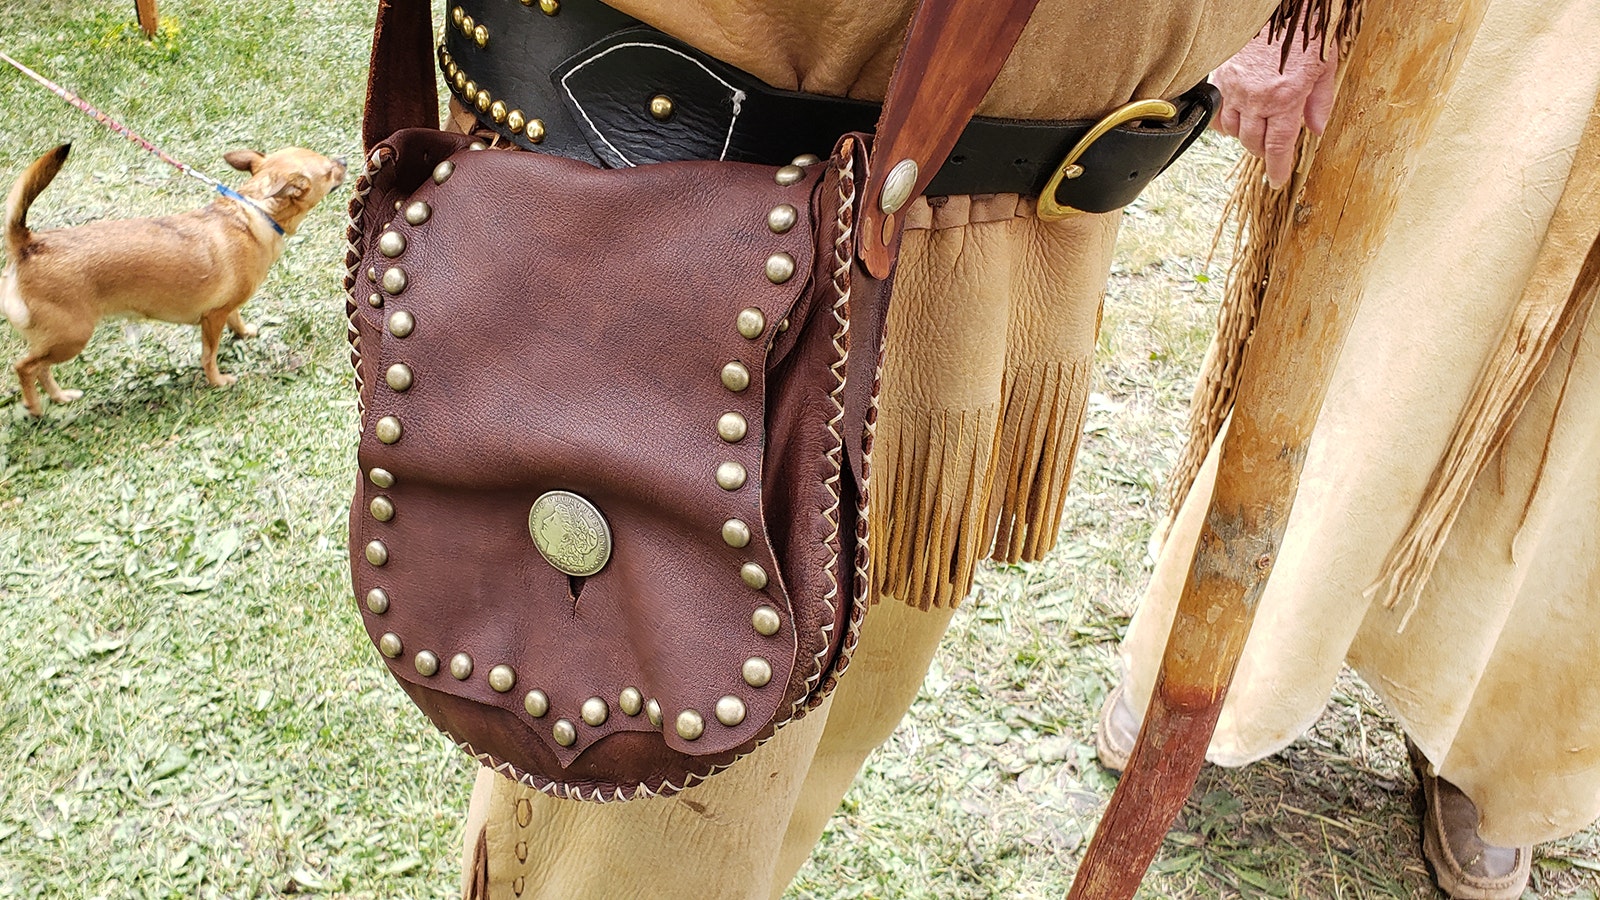 Leather pouches were referred to as a "possibles" bags because they hold every possible little thing a mountain man might need out on the trail.